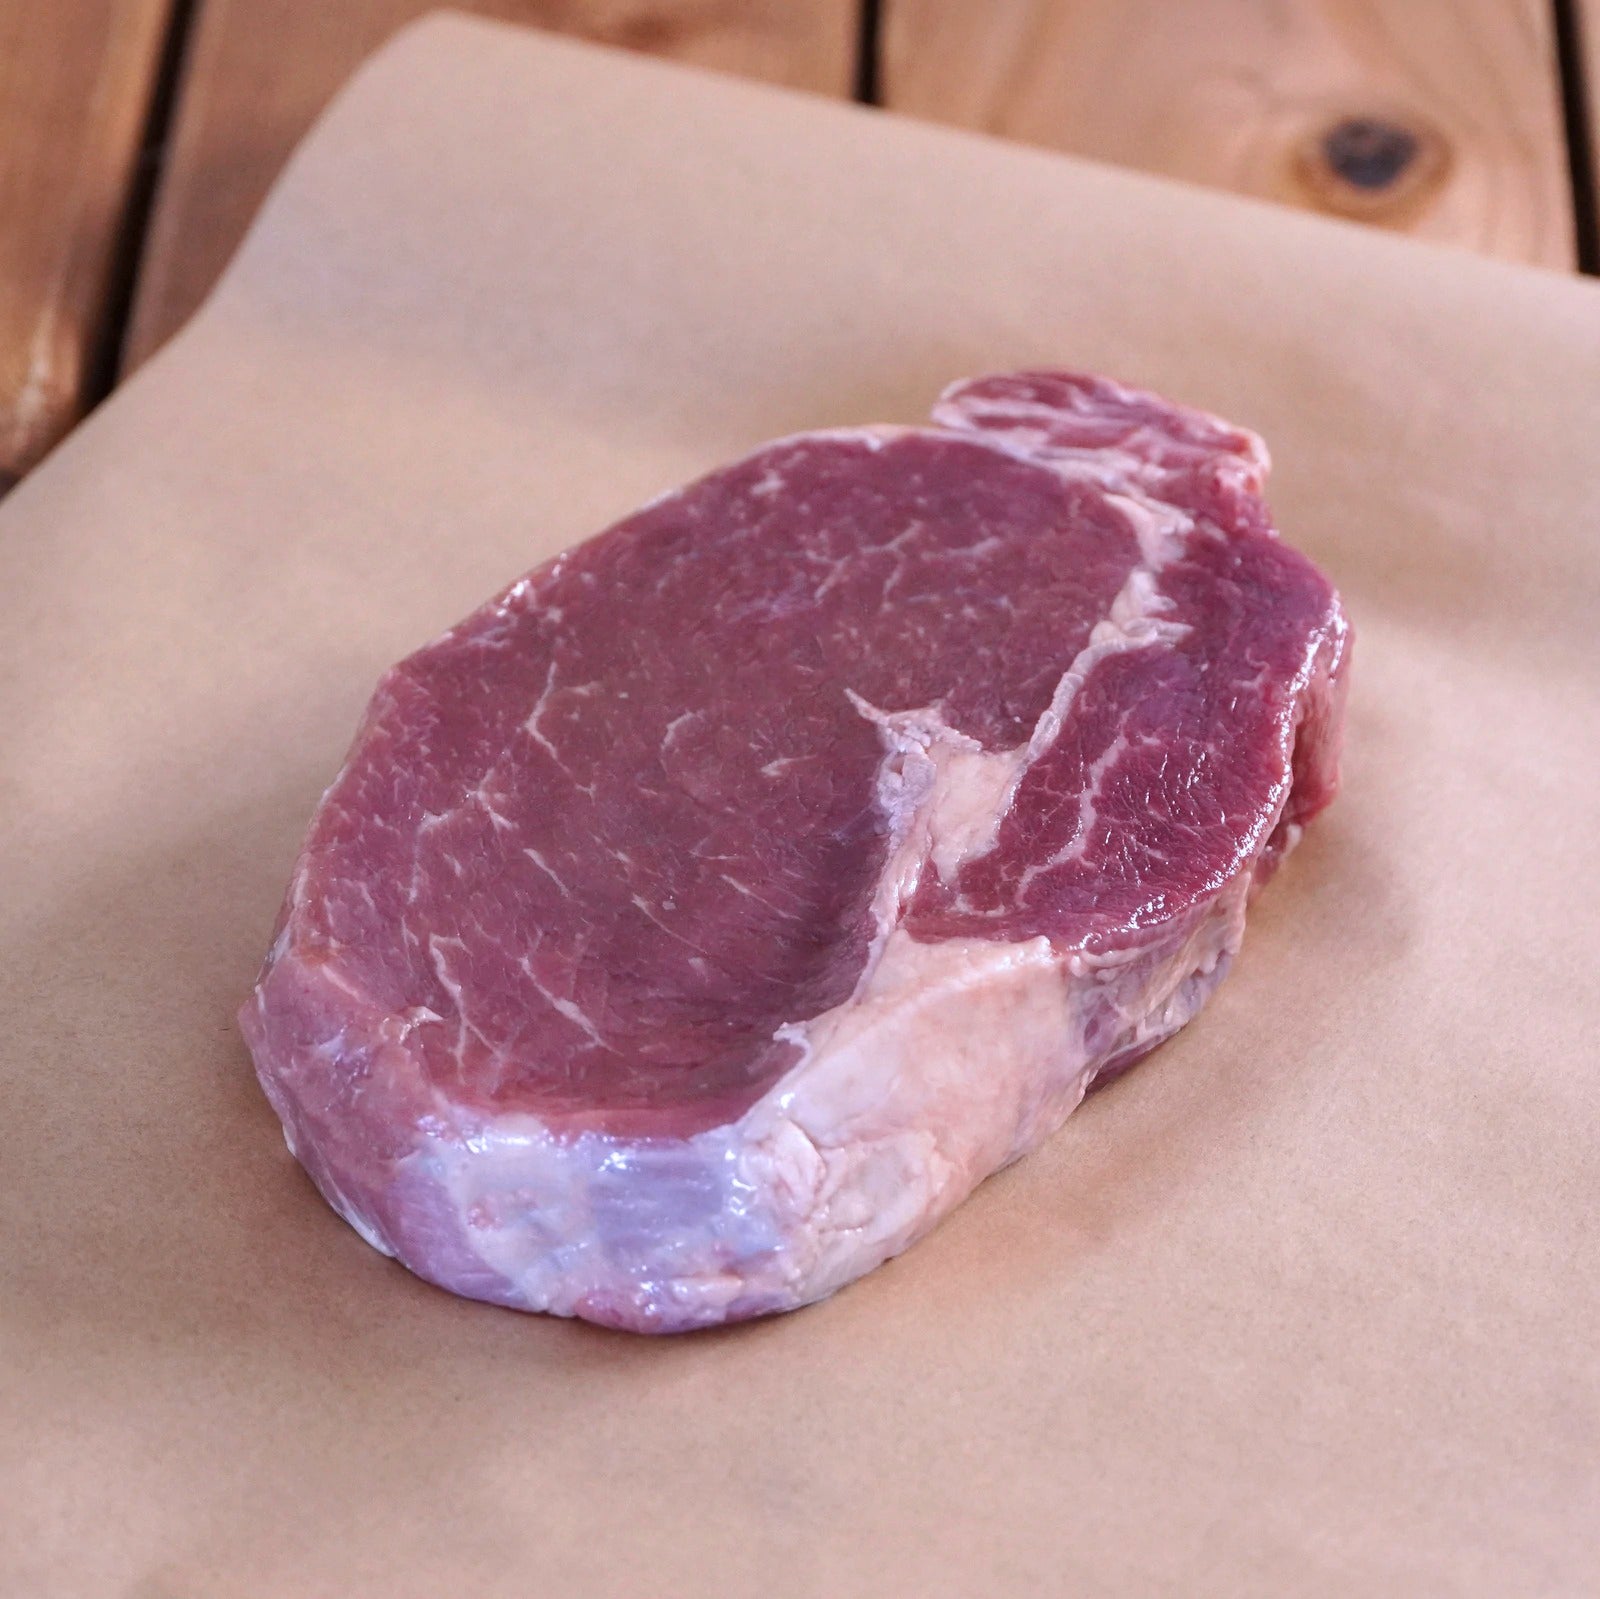 Curated Set of Grass-Fed Beef Steaks (3 Types, 18 Items, 3.6kg) - Horizon Farms